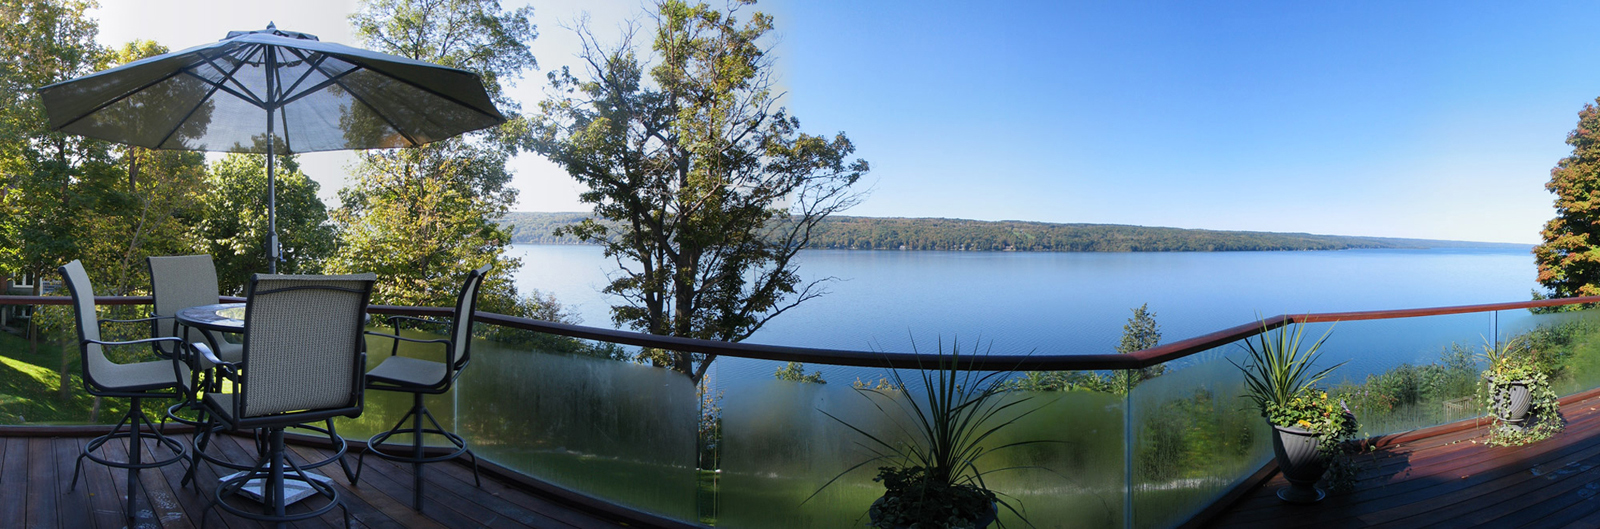 Deck view of the lake